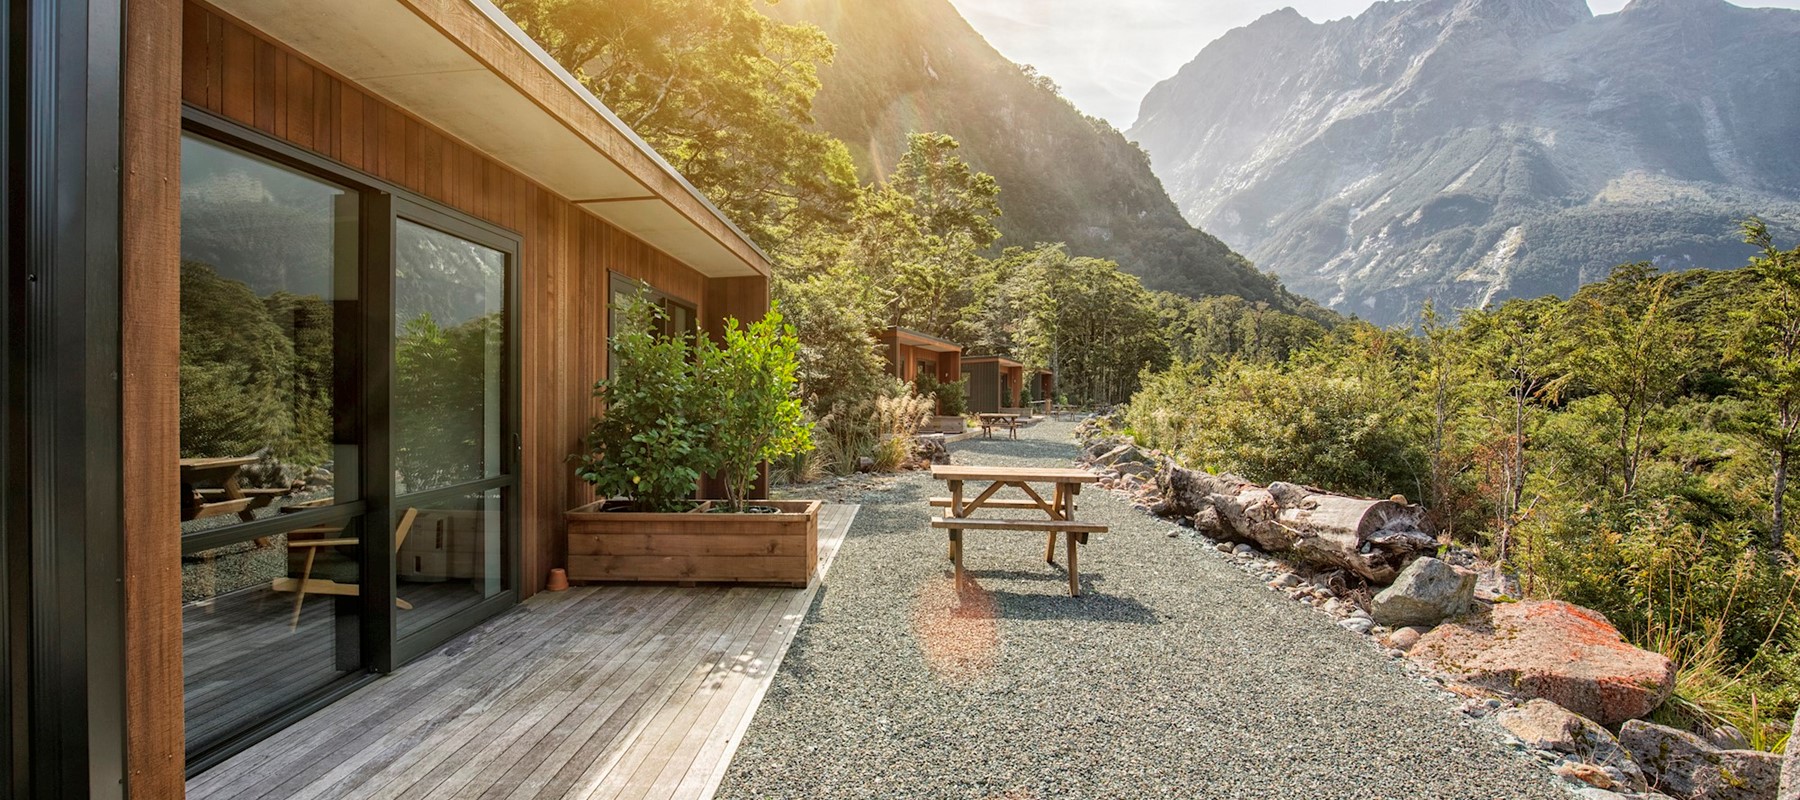 Sunrise streaming over the mountains onto the Milford Sound Lodge Chalets, lighting up the native green bush and the natural wooden chalets 